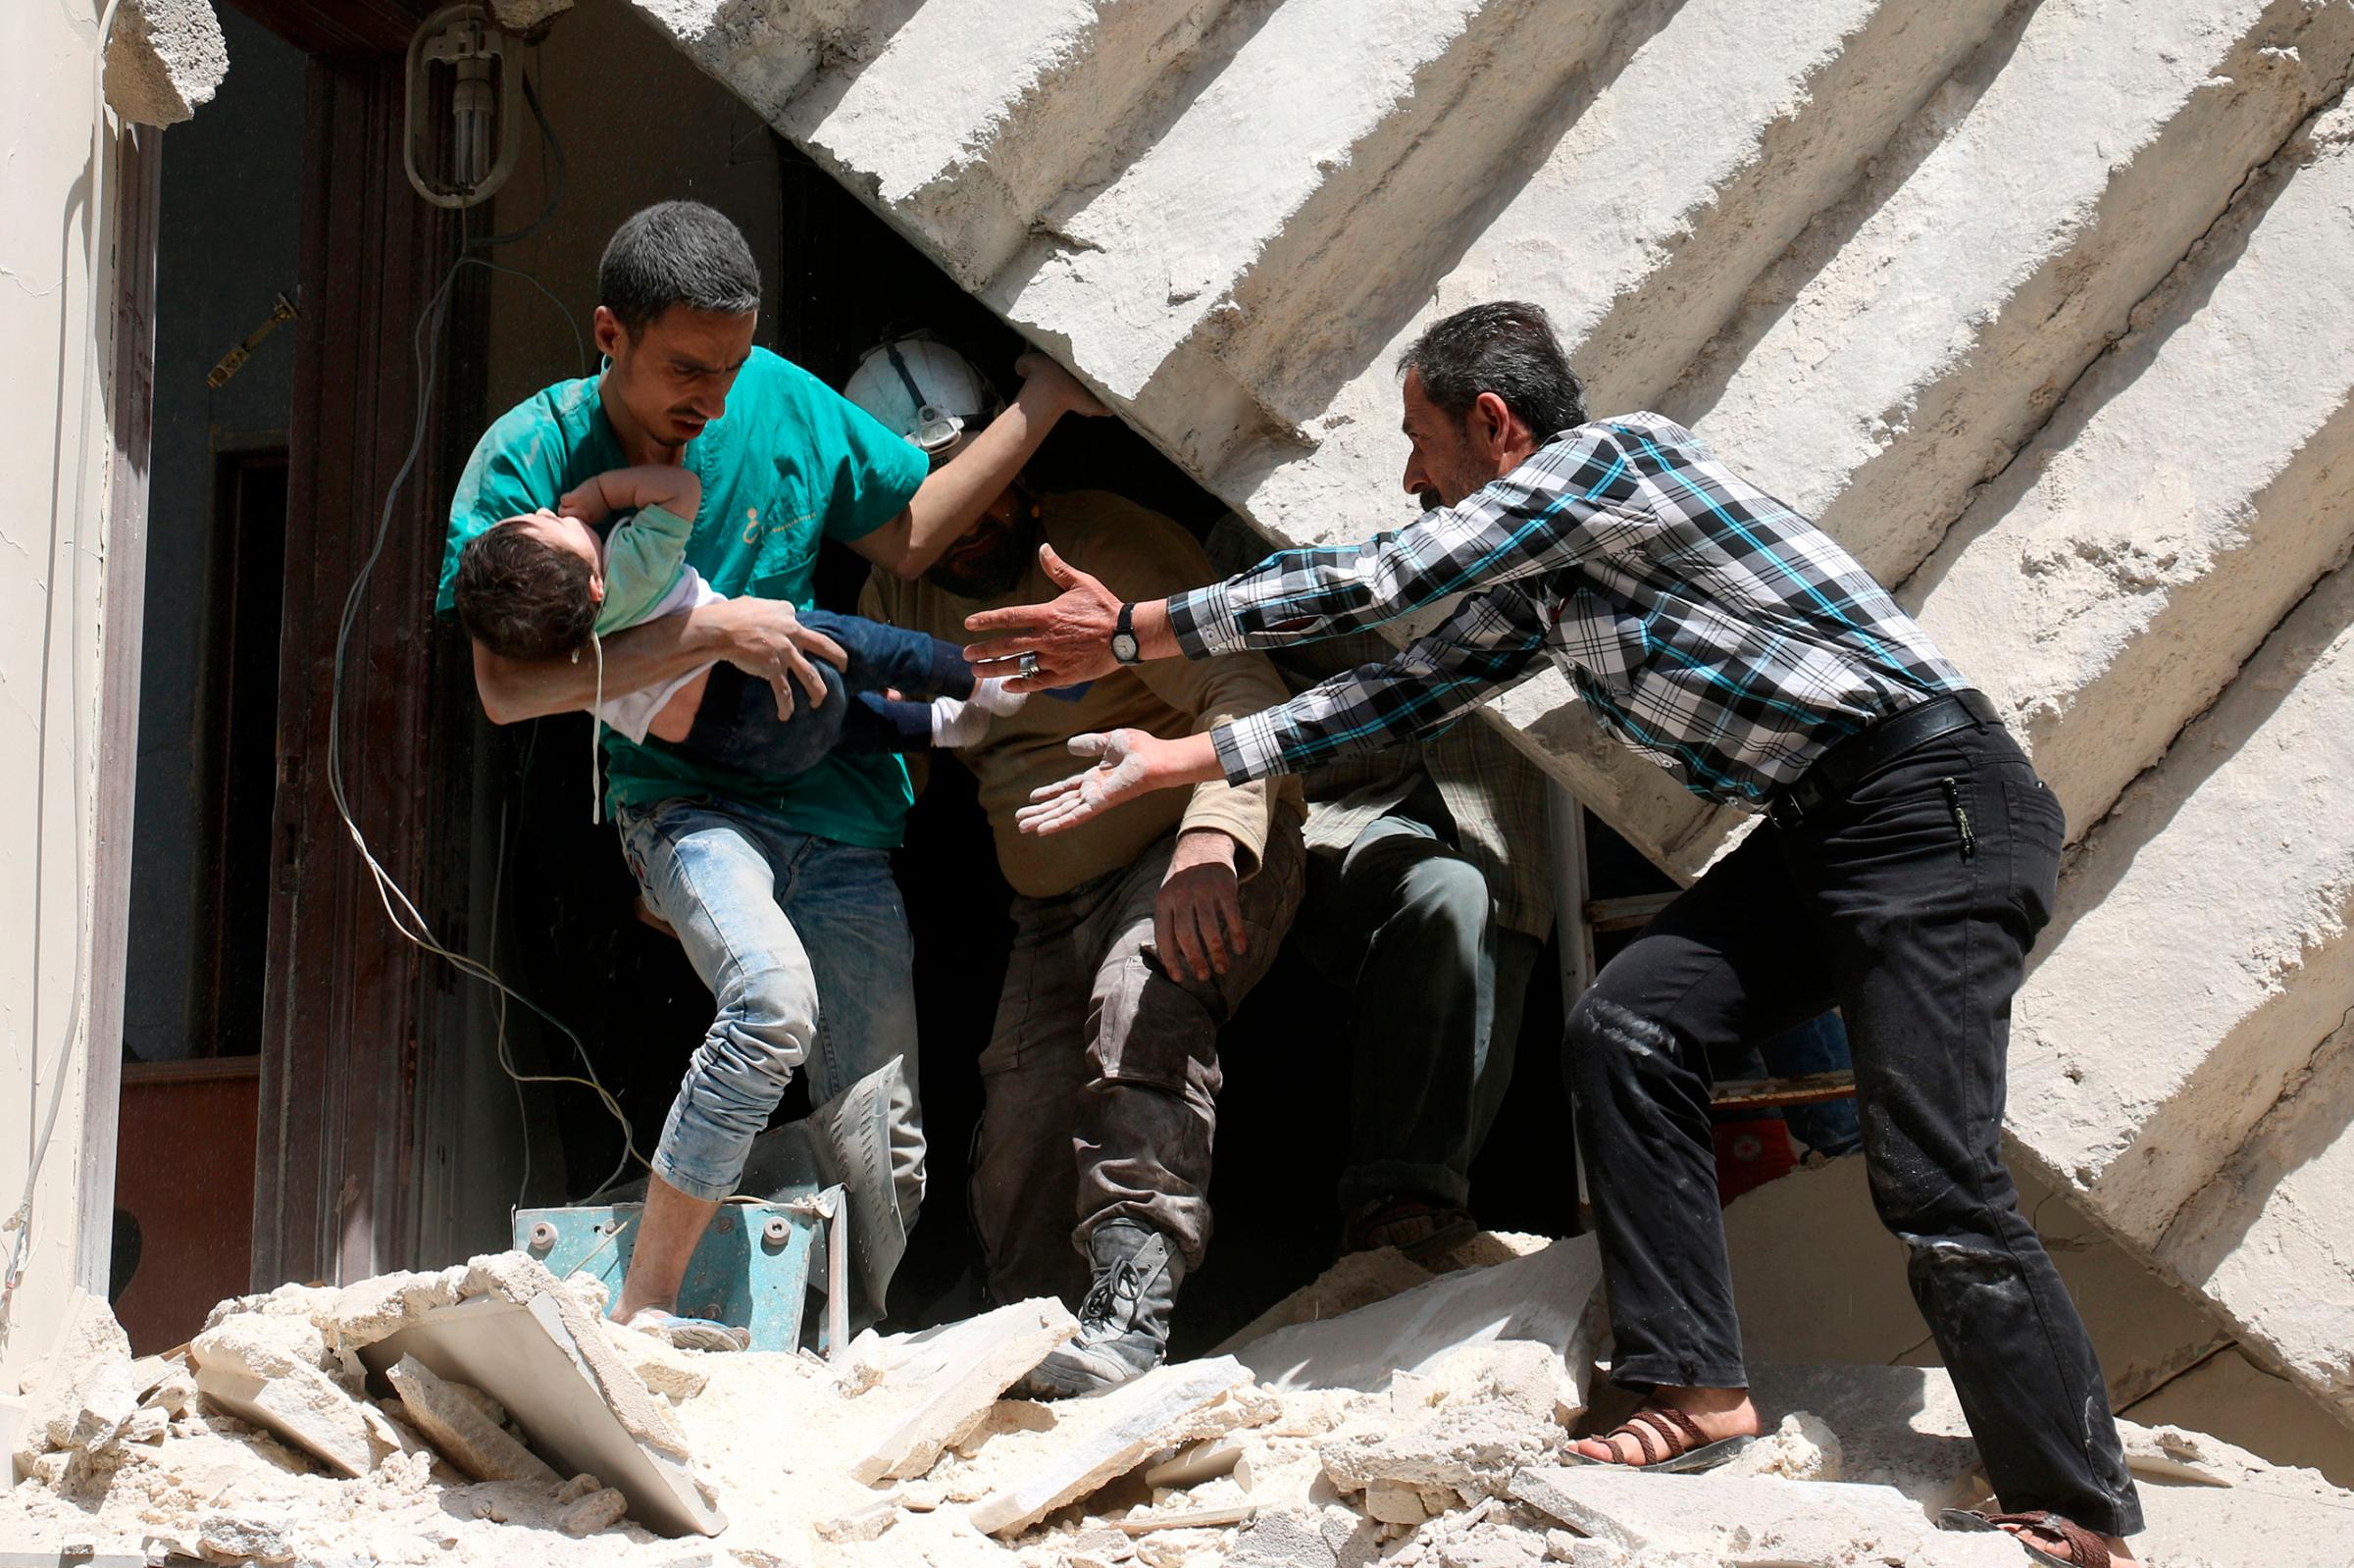 A toddler is passed between men who are evacuating residents from a destroyed building following a reported airstrike on a rebel-held neighborhood in Aleppo, Syria, April 28, 2016.